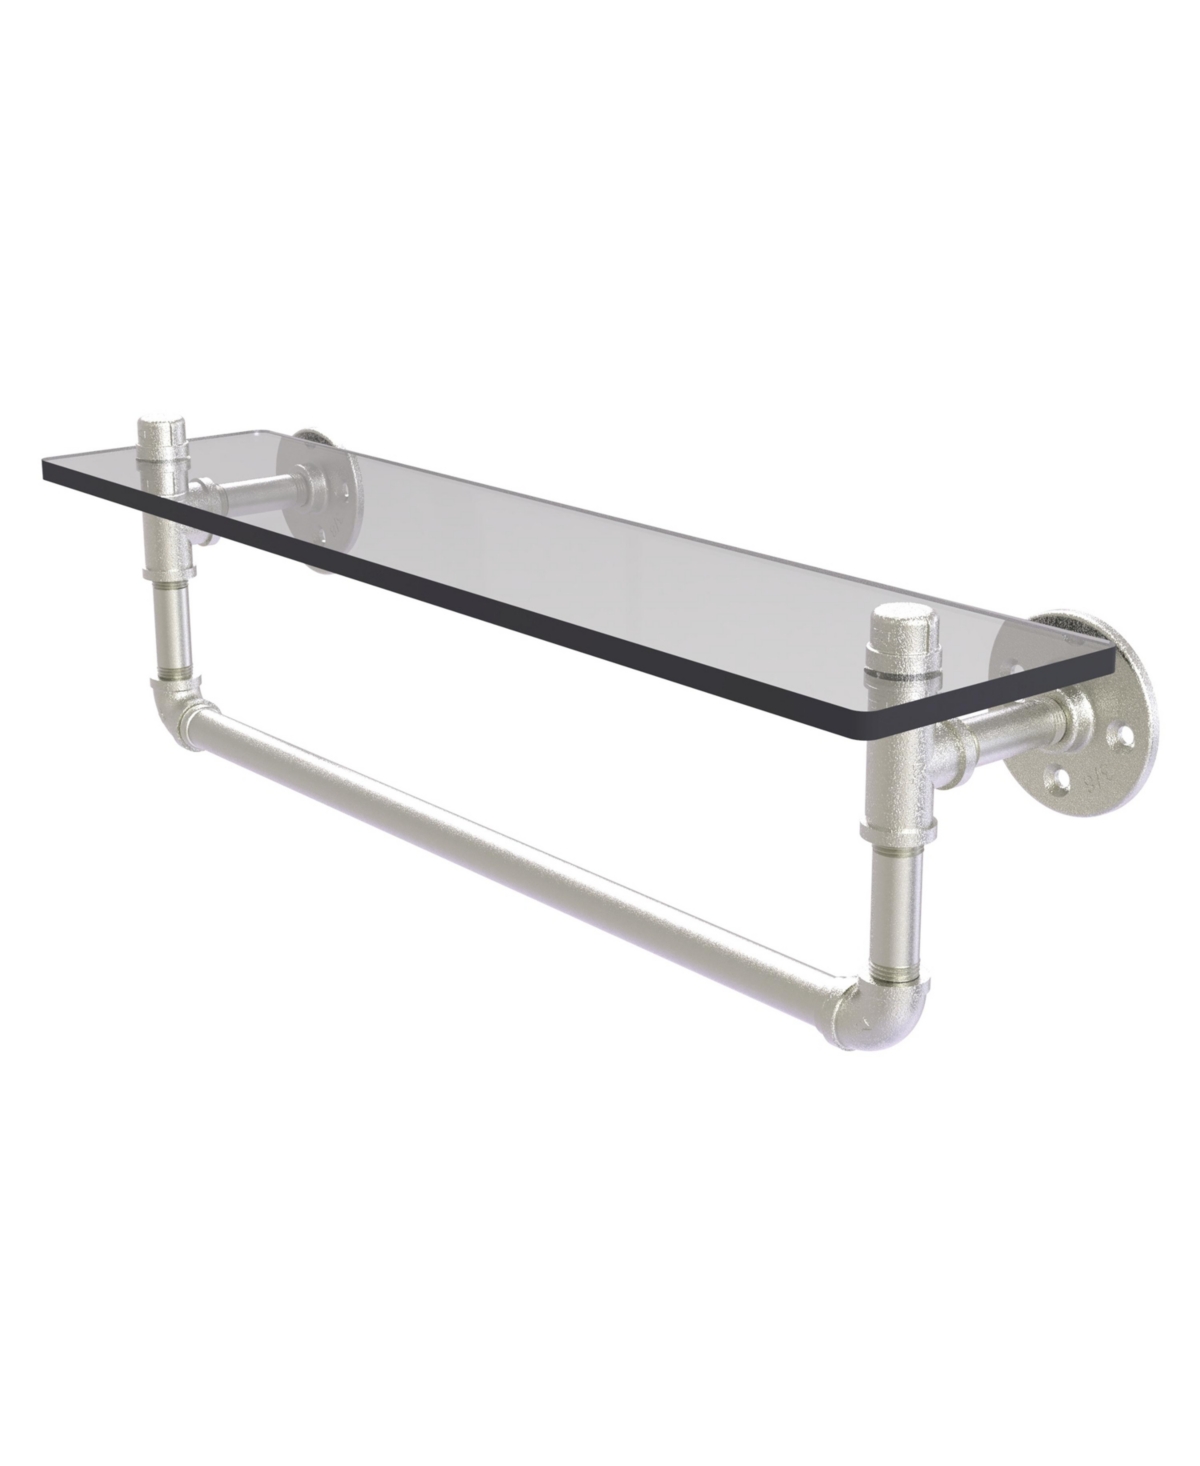 Allied Brass Pipeline Collection 22 Inch Glass Shelf With Towel Bar In Satin Nickel